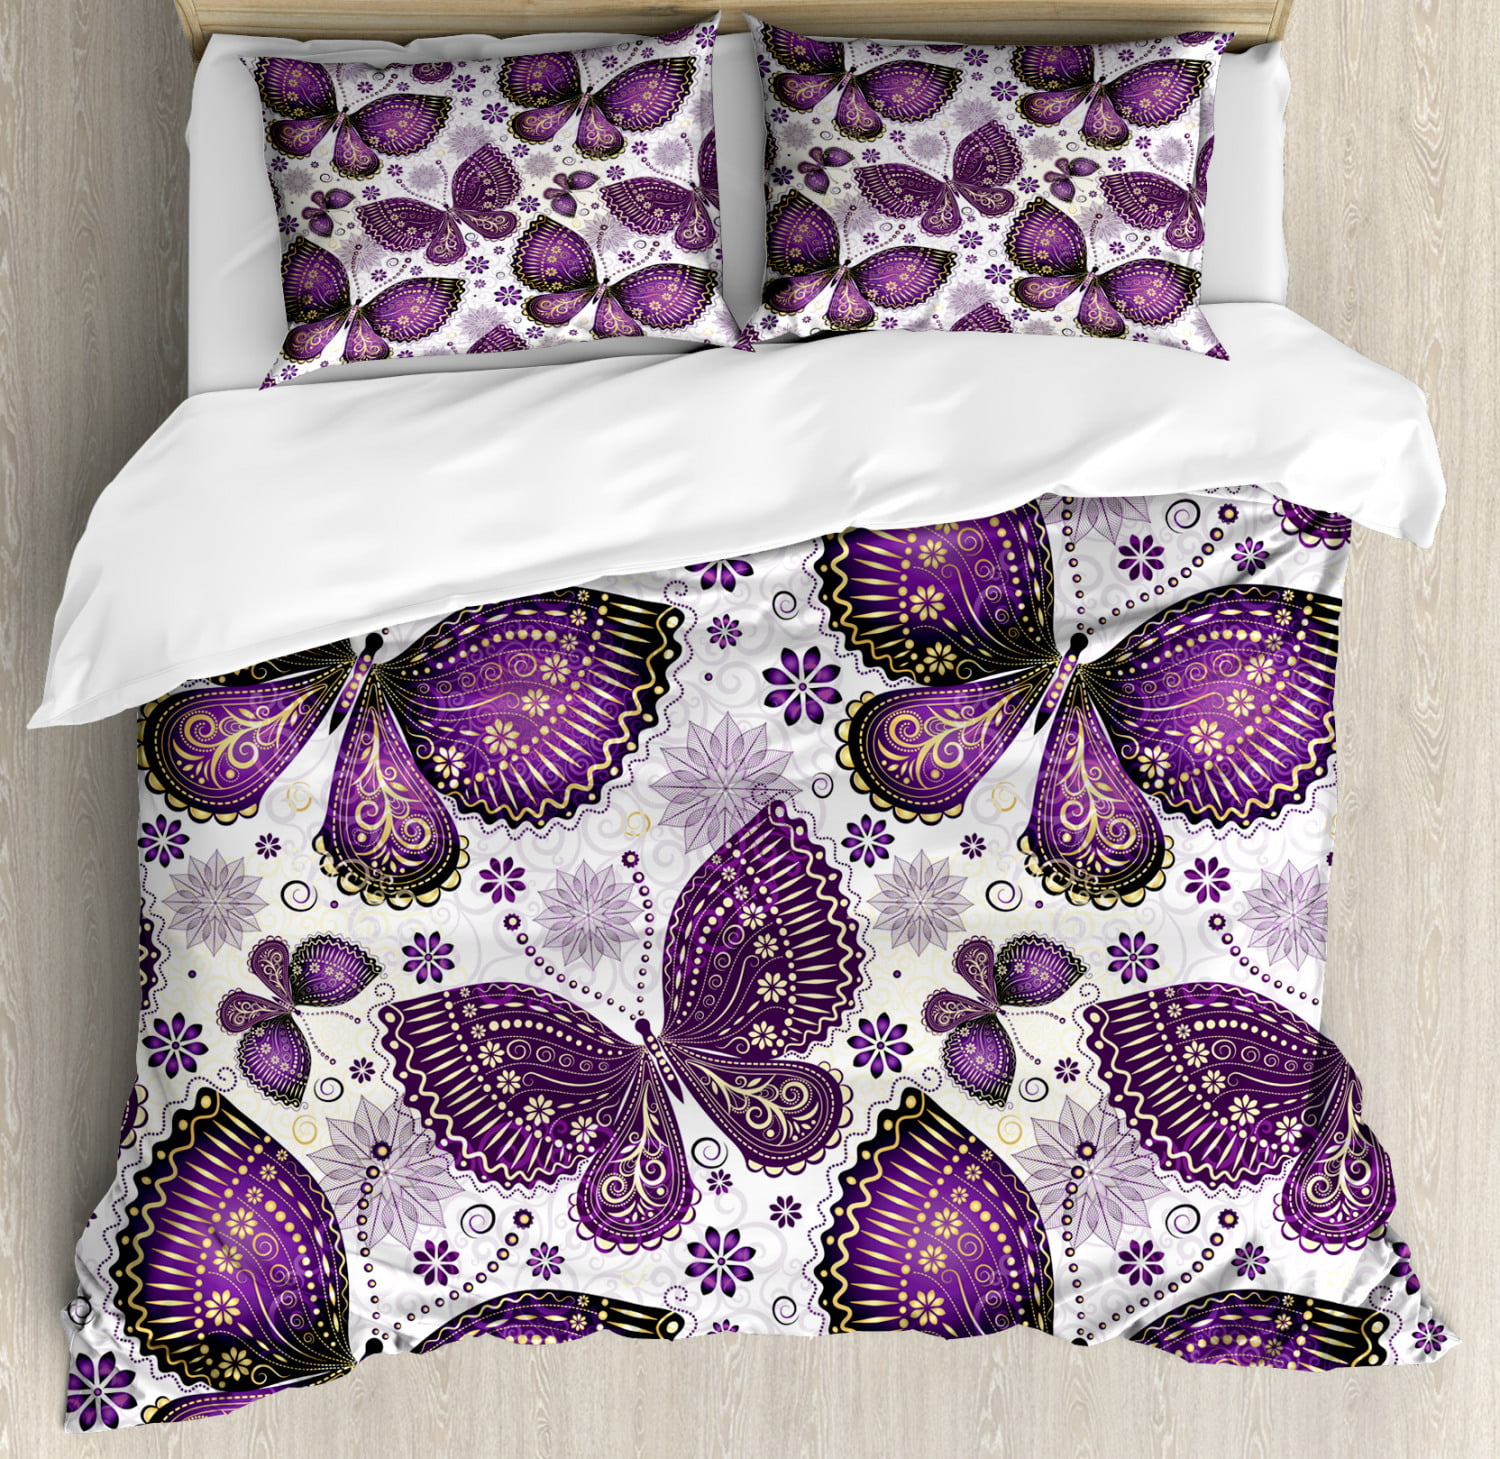 Butterfly Duvet Cover Pillowcase Twin Full Queen King Bedding Set Paisley Floral 